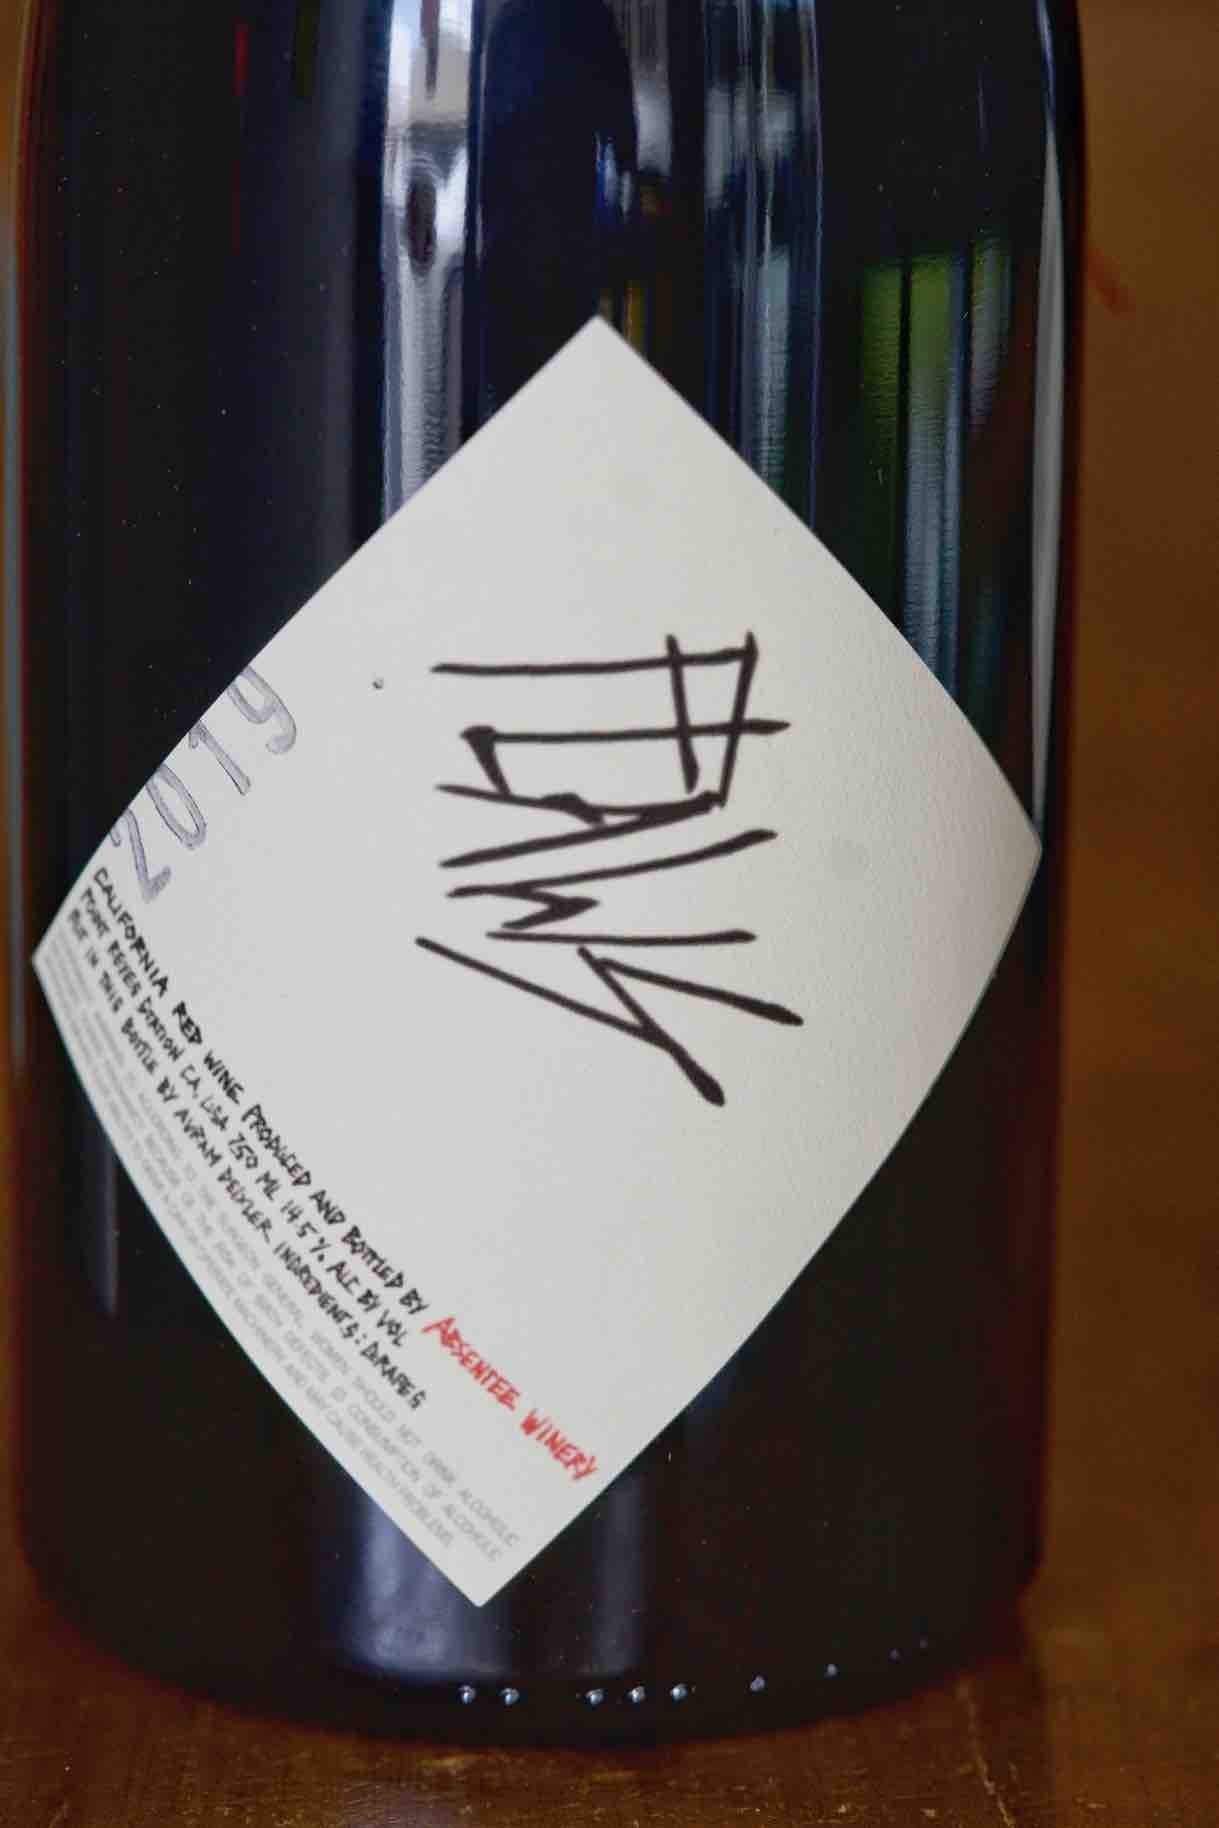 Absentee Winery California Red Wine Abouriou "Flaws" 2019 1.5L